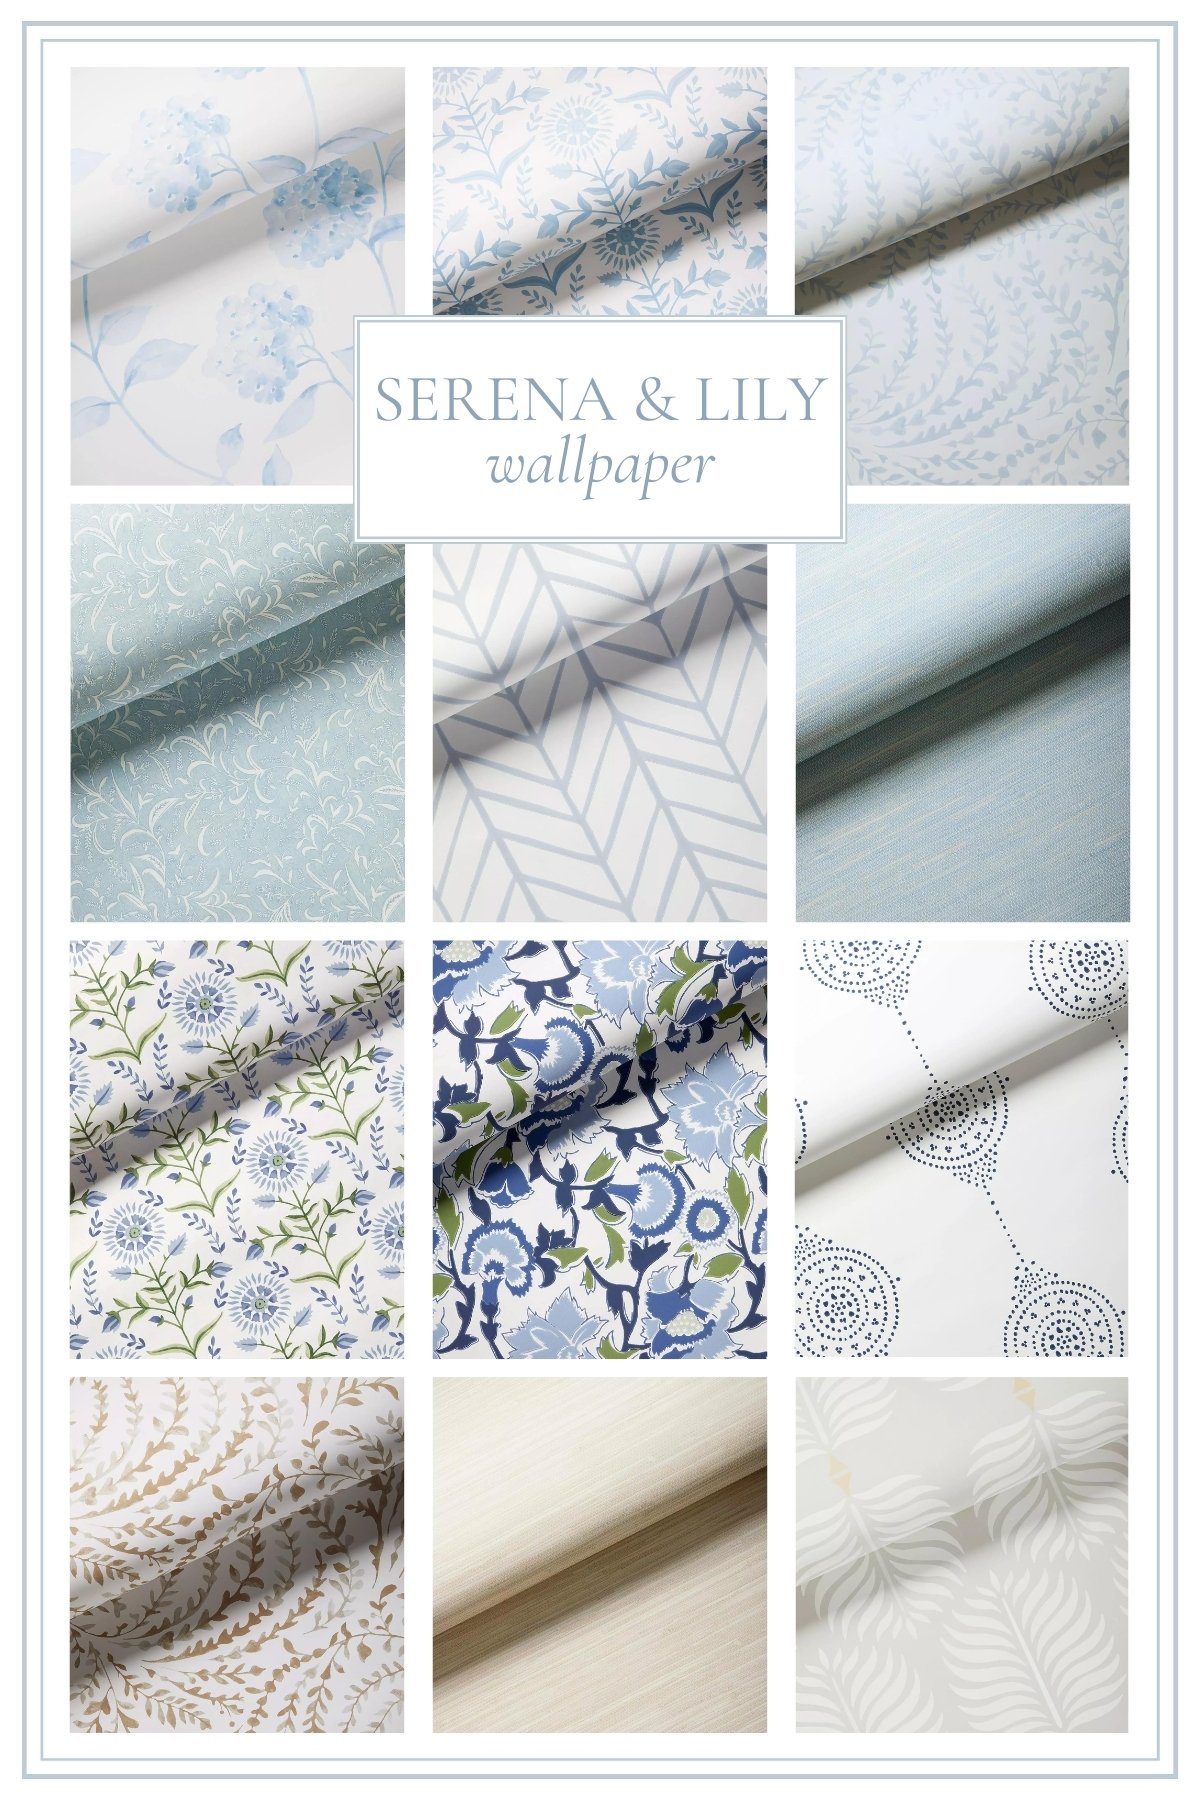 Explore the Serena & Lily wallpaper collection.